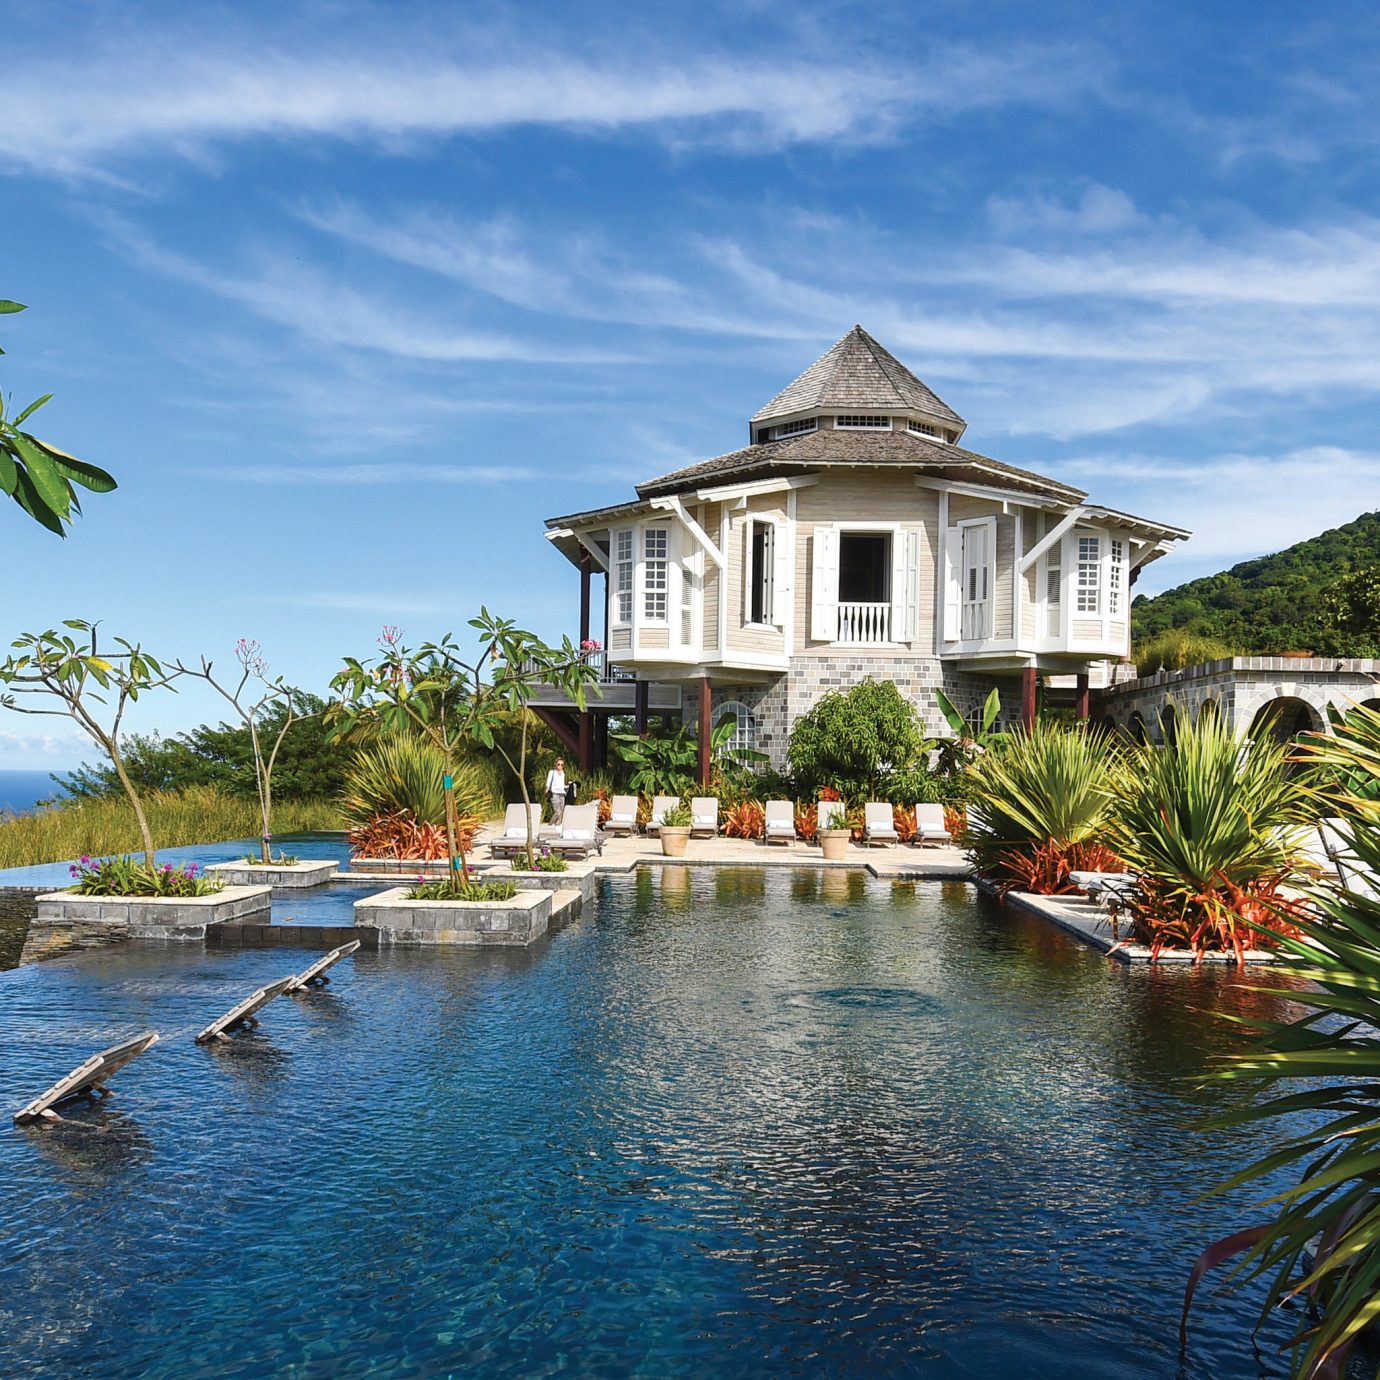 Trip Ideas water sky tree house Boat Nature Lake Resort Sea swimming pool surrounded pond Island